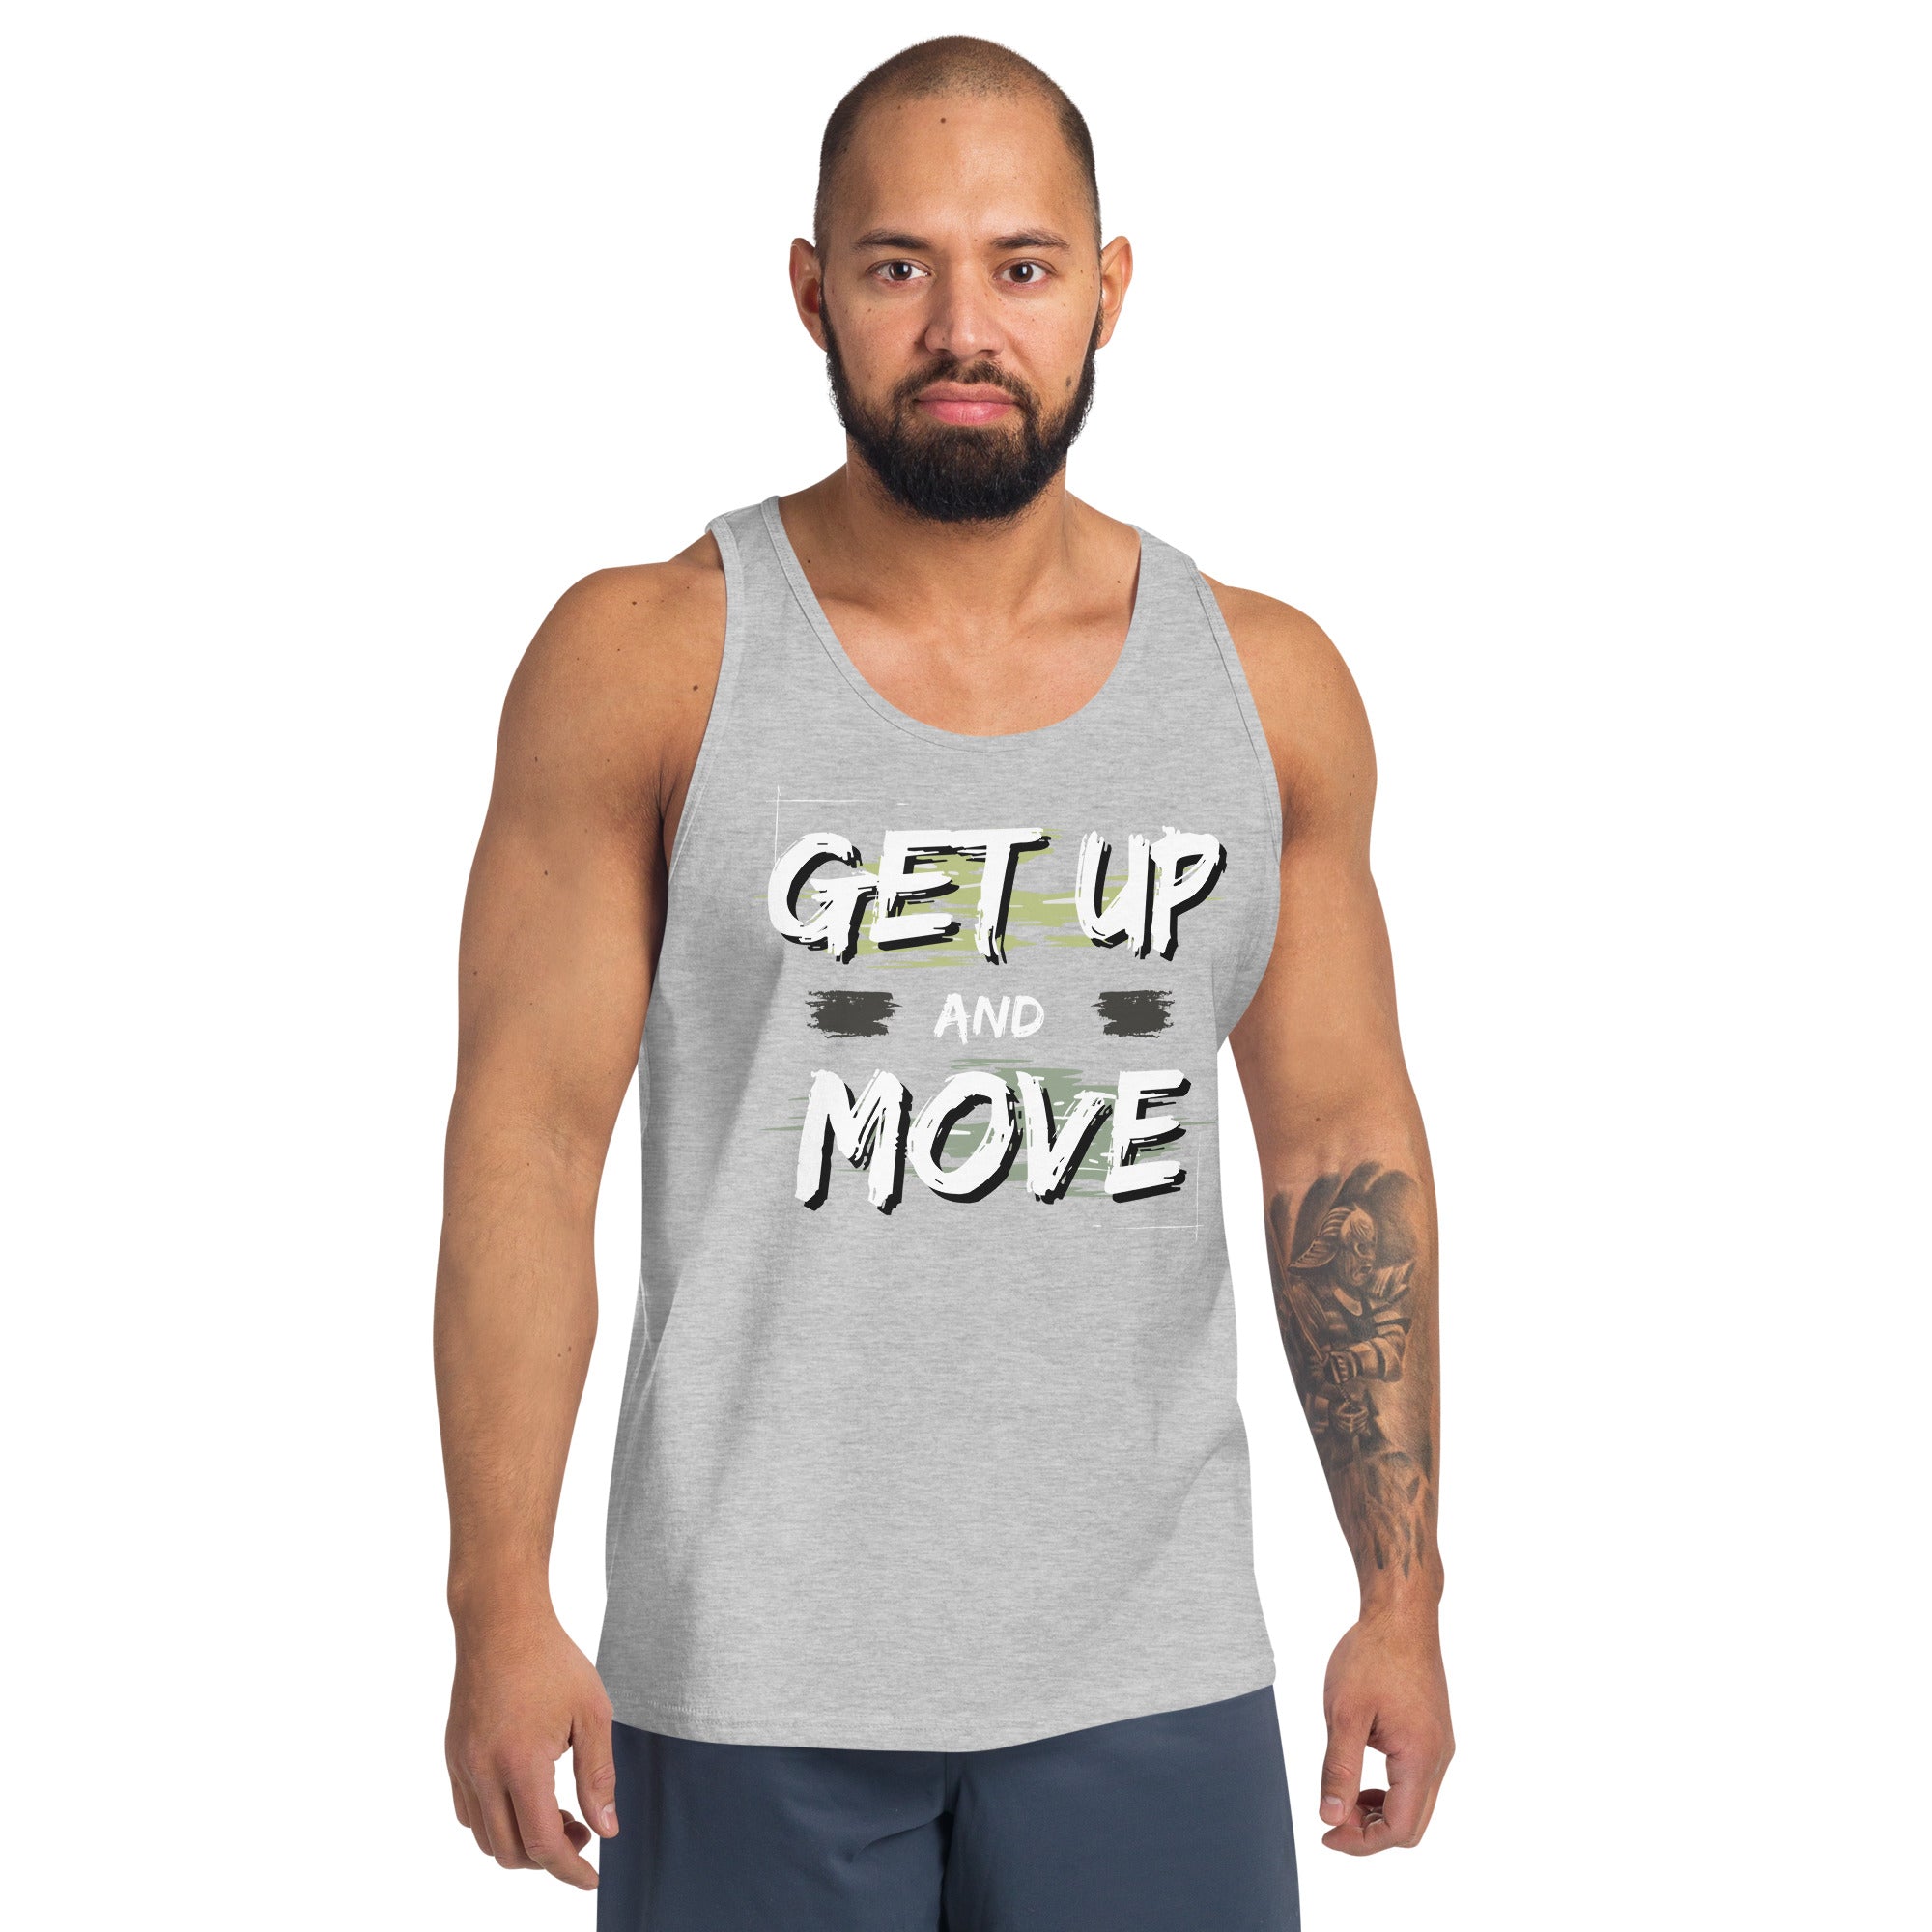 Get up and Move Top